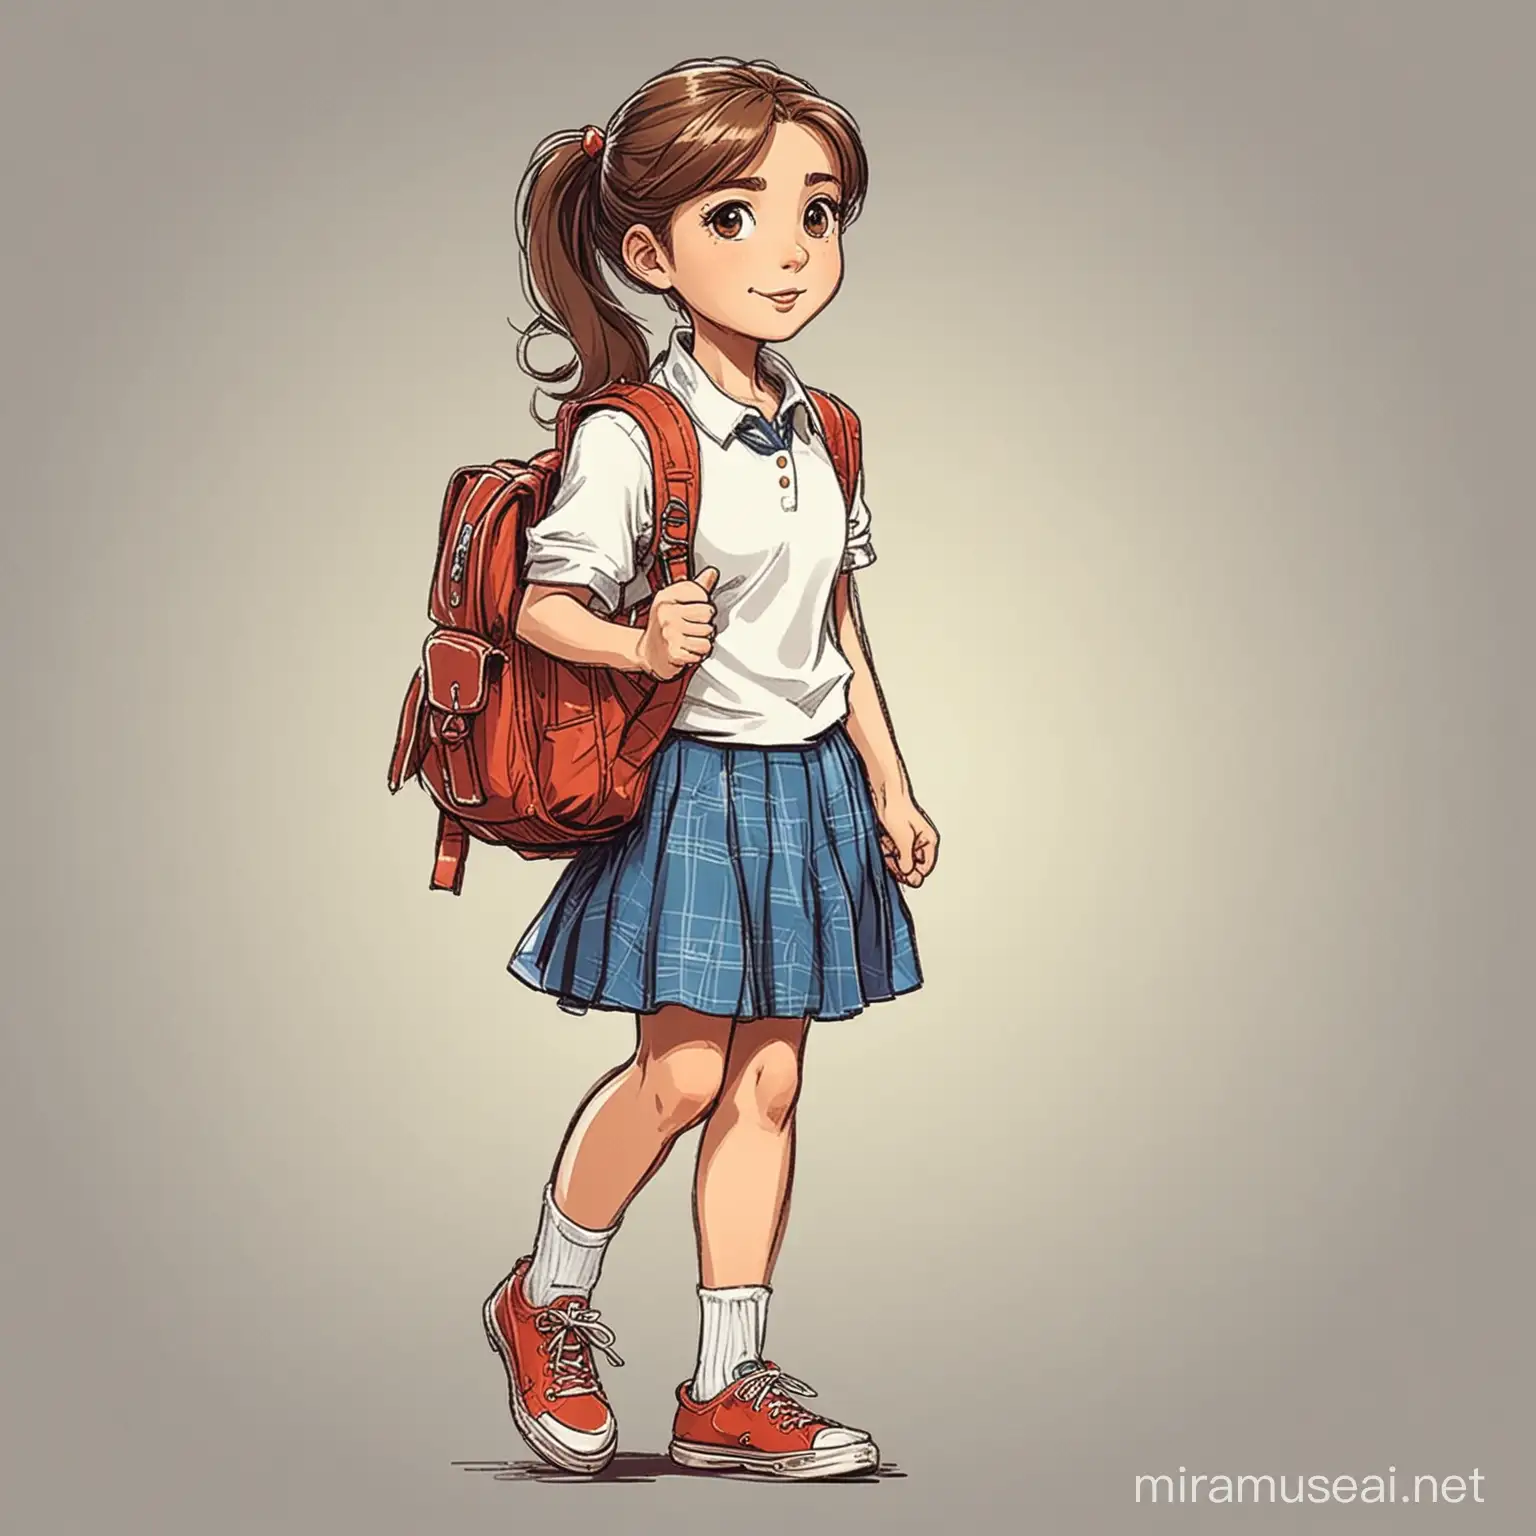 Adorable 5th Grade Girl with Schoolbag in HandDrawn Comic Style